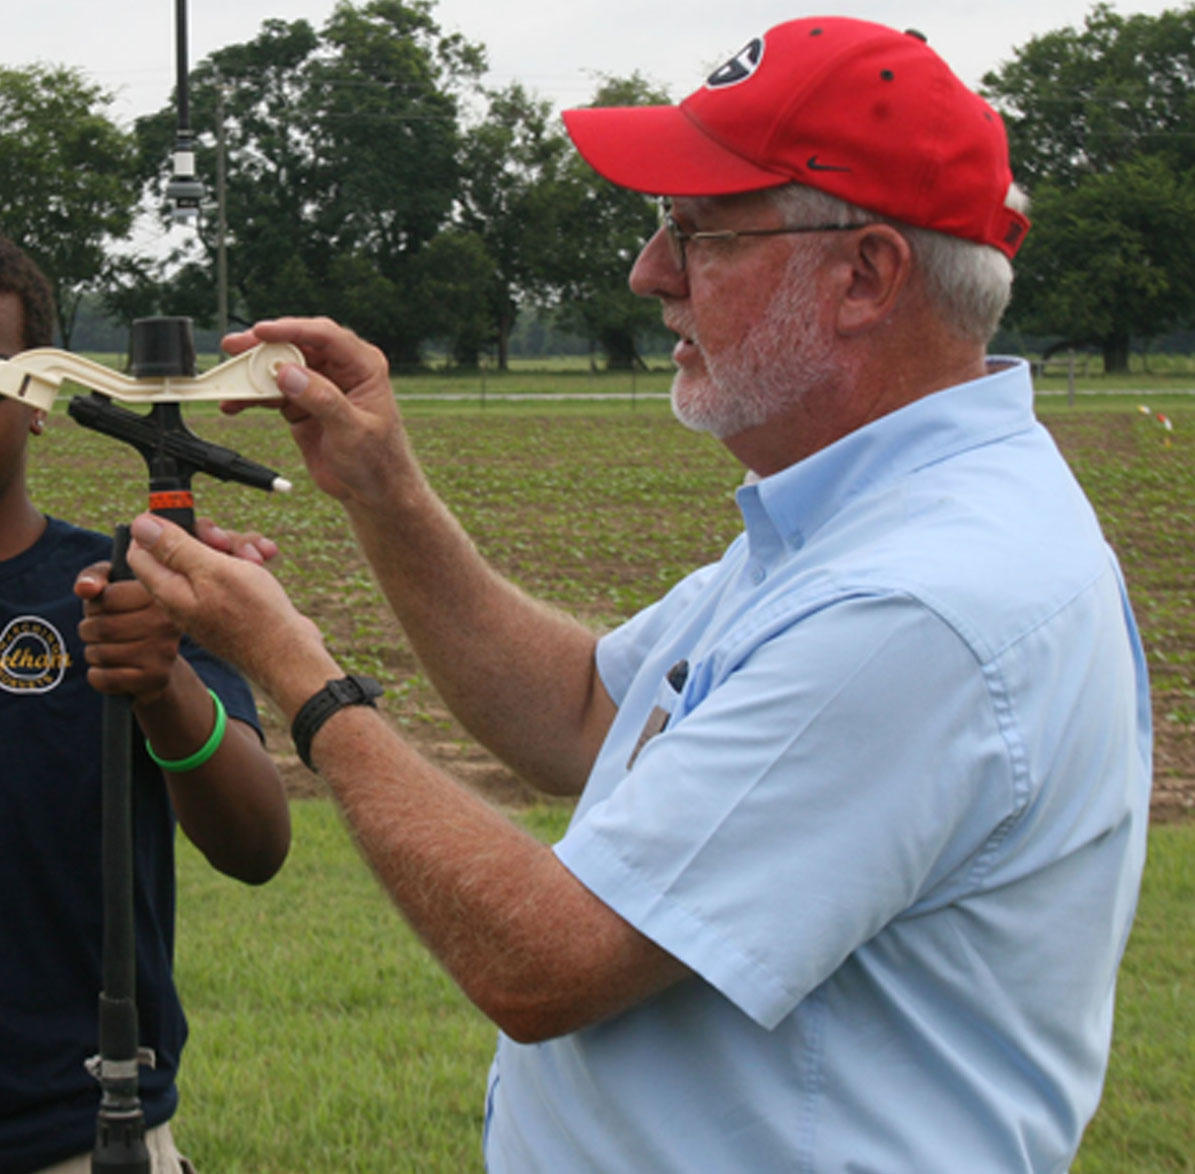 Calvin Perry, superintendent of the UGA Stripling Irrigation Research Park in Camilla, Georgia, speaks about center pivot irrigation during 4-H20 camp held on Tuesday.